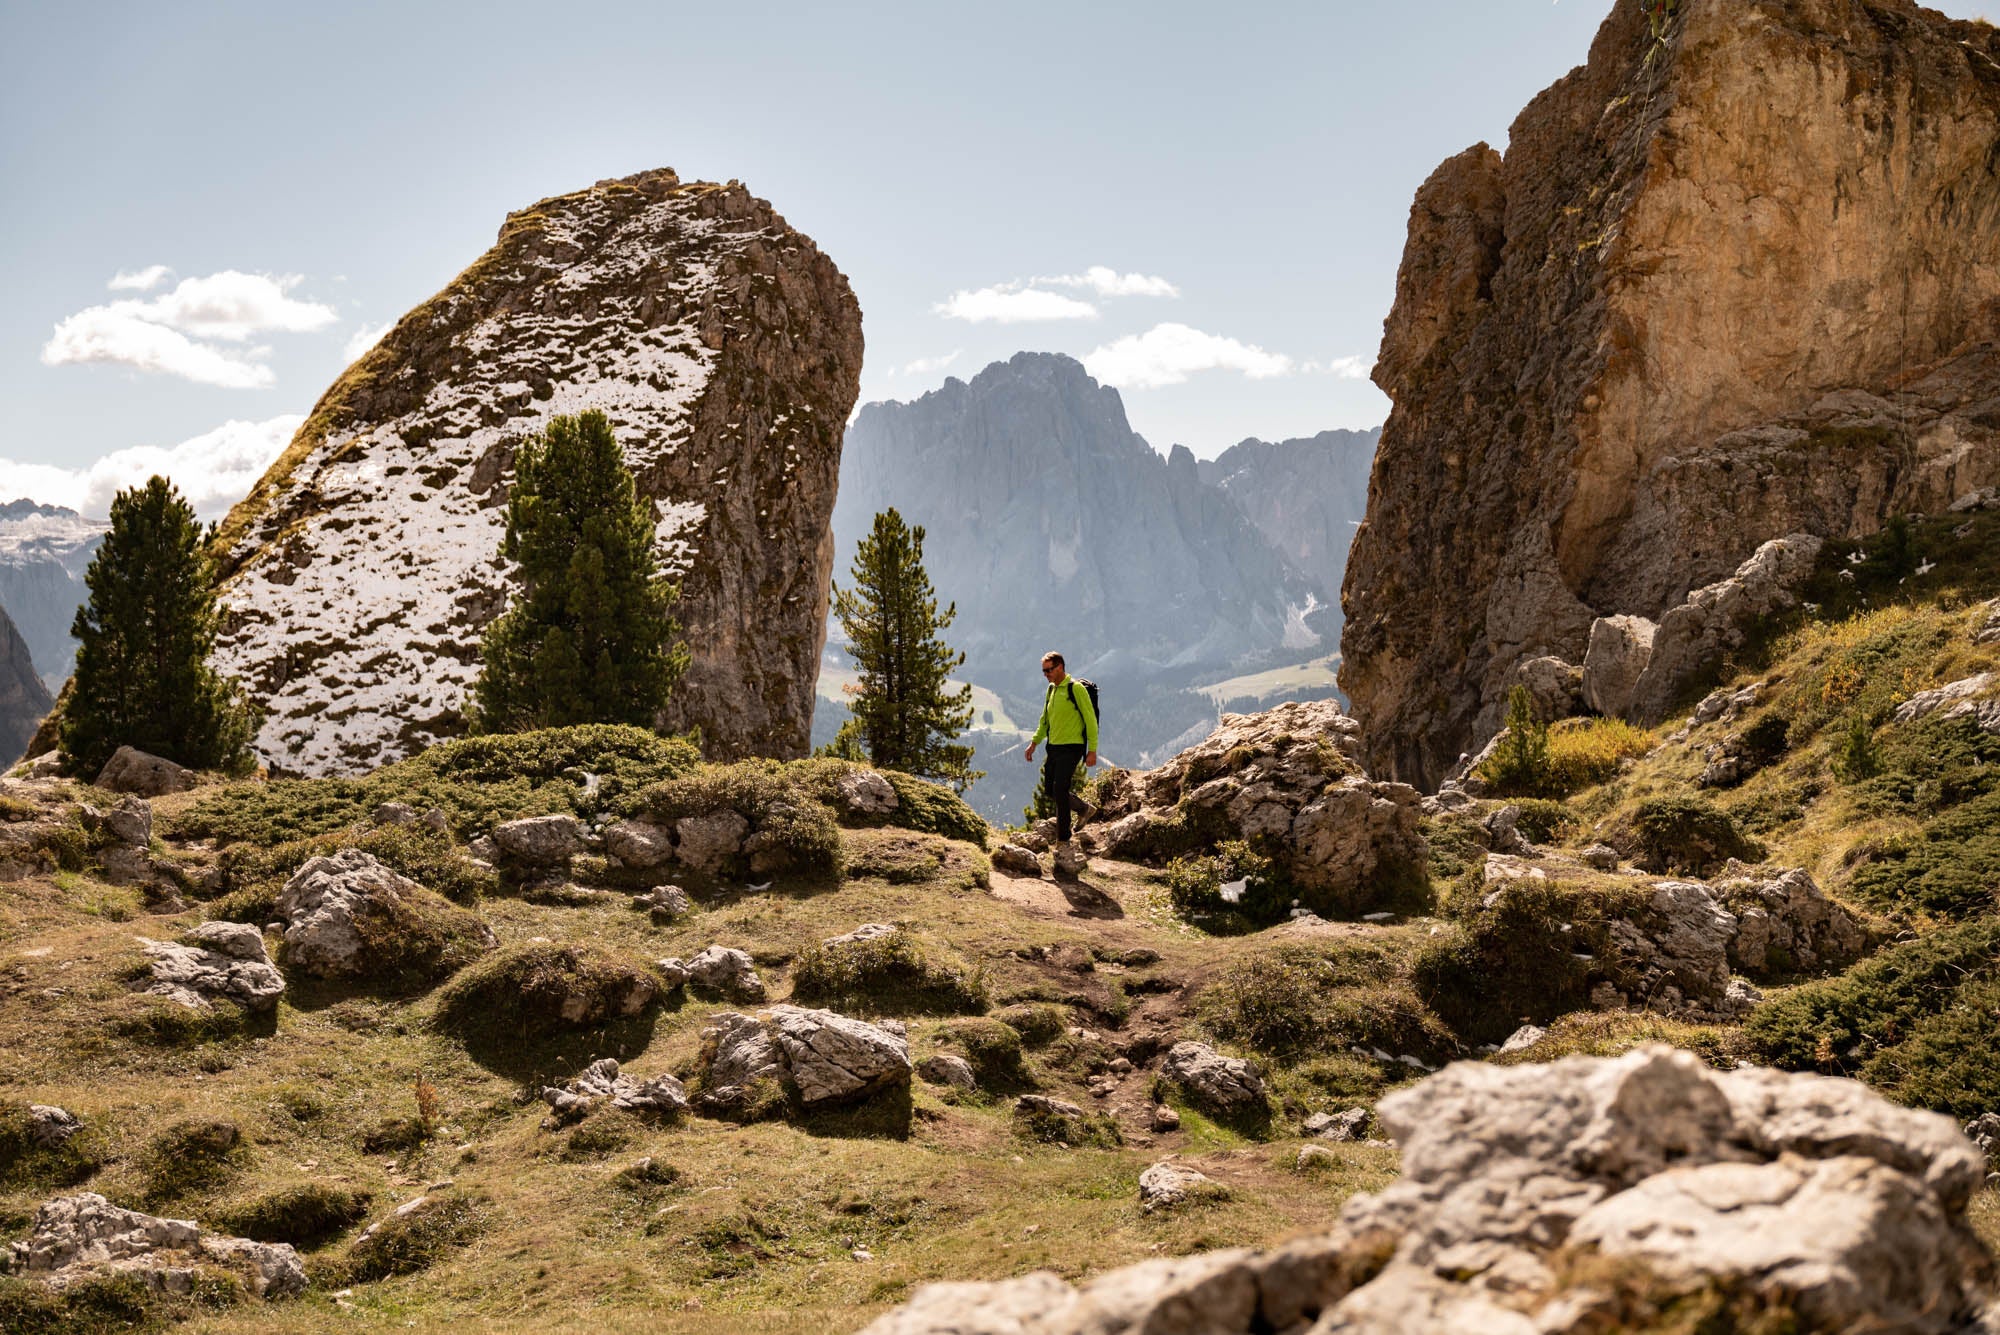 Val Gardena is an outdoor adventurer’s paradise all year round